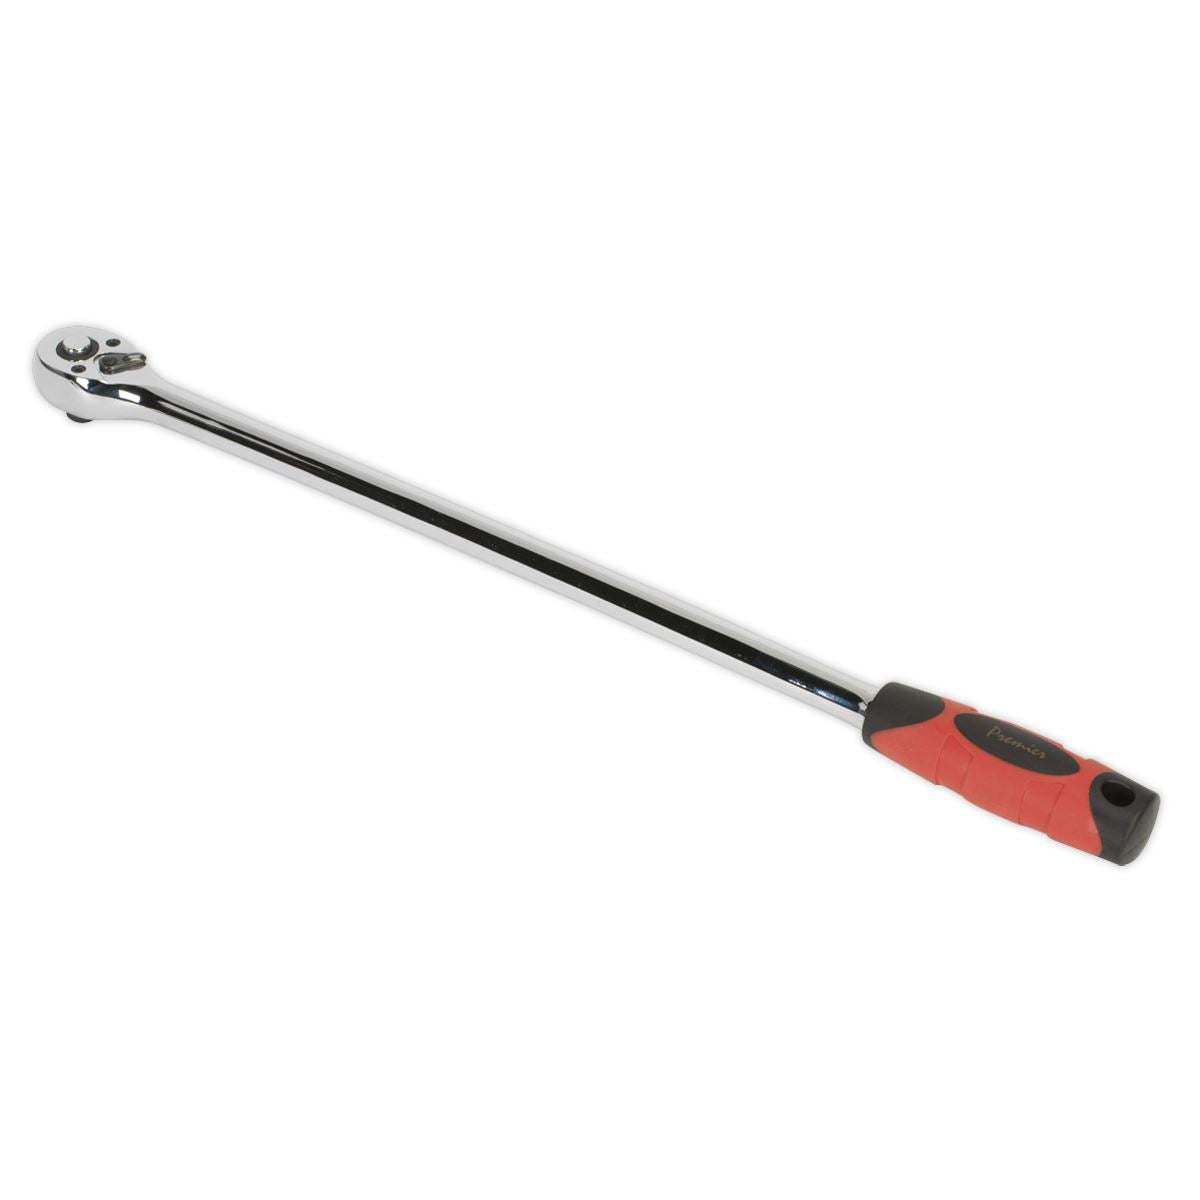 Sealey Premier Ratchet Wrench Extra-Long 435mm 3/8"Sq Drive